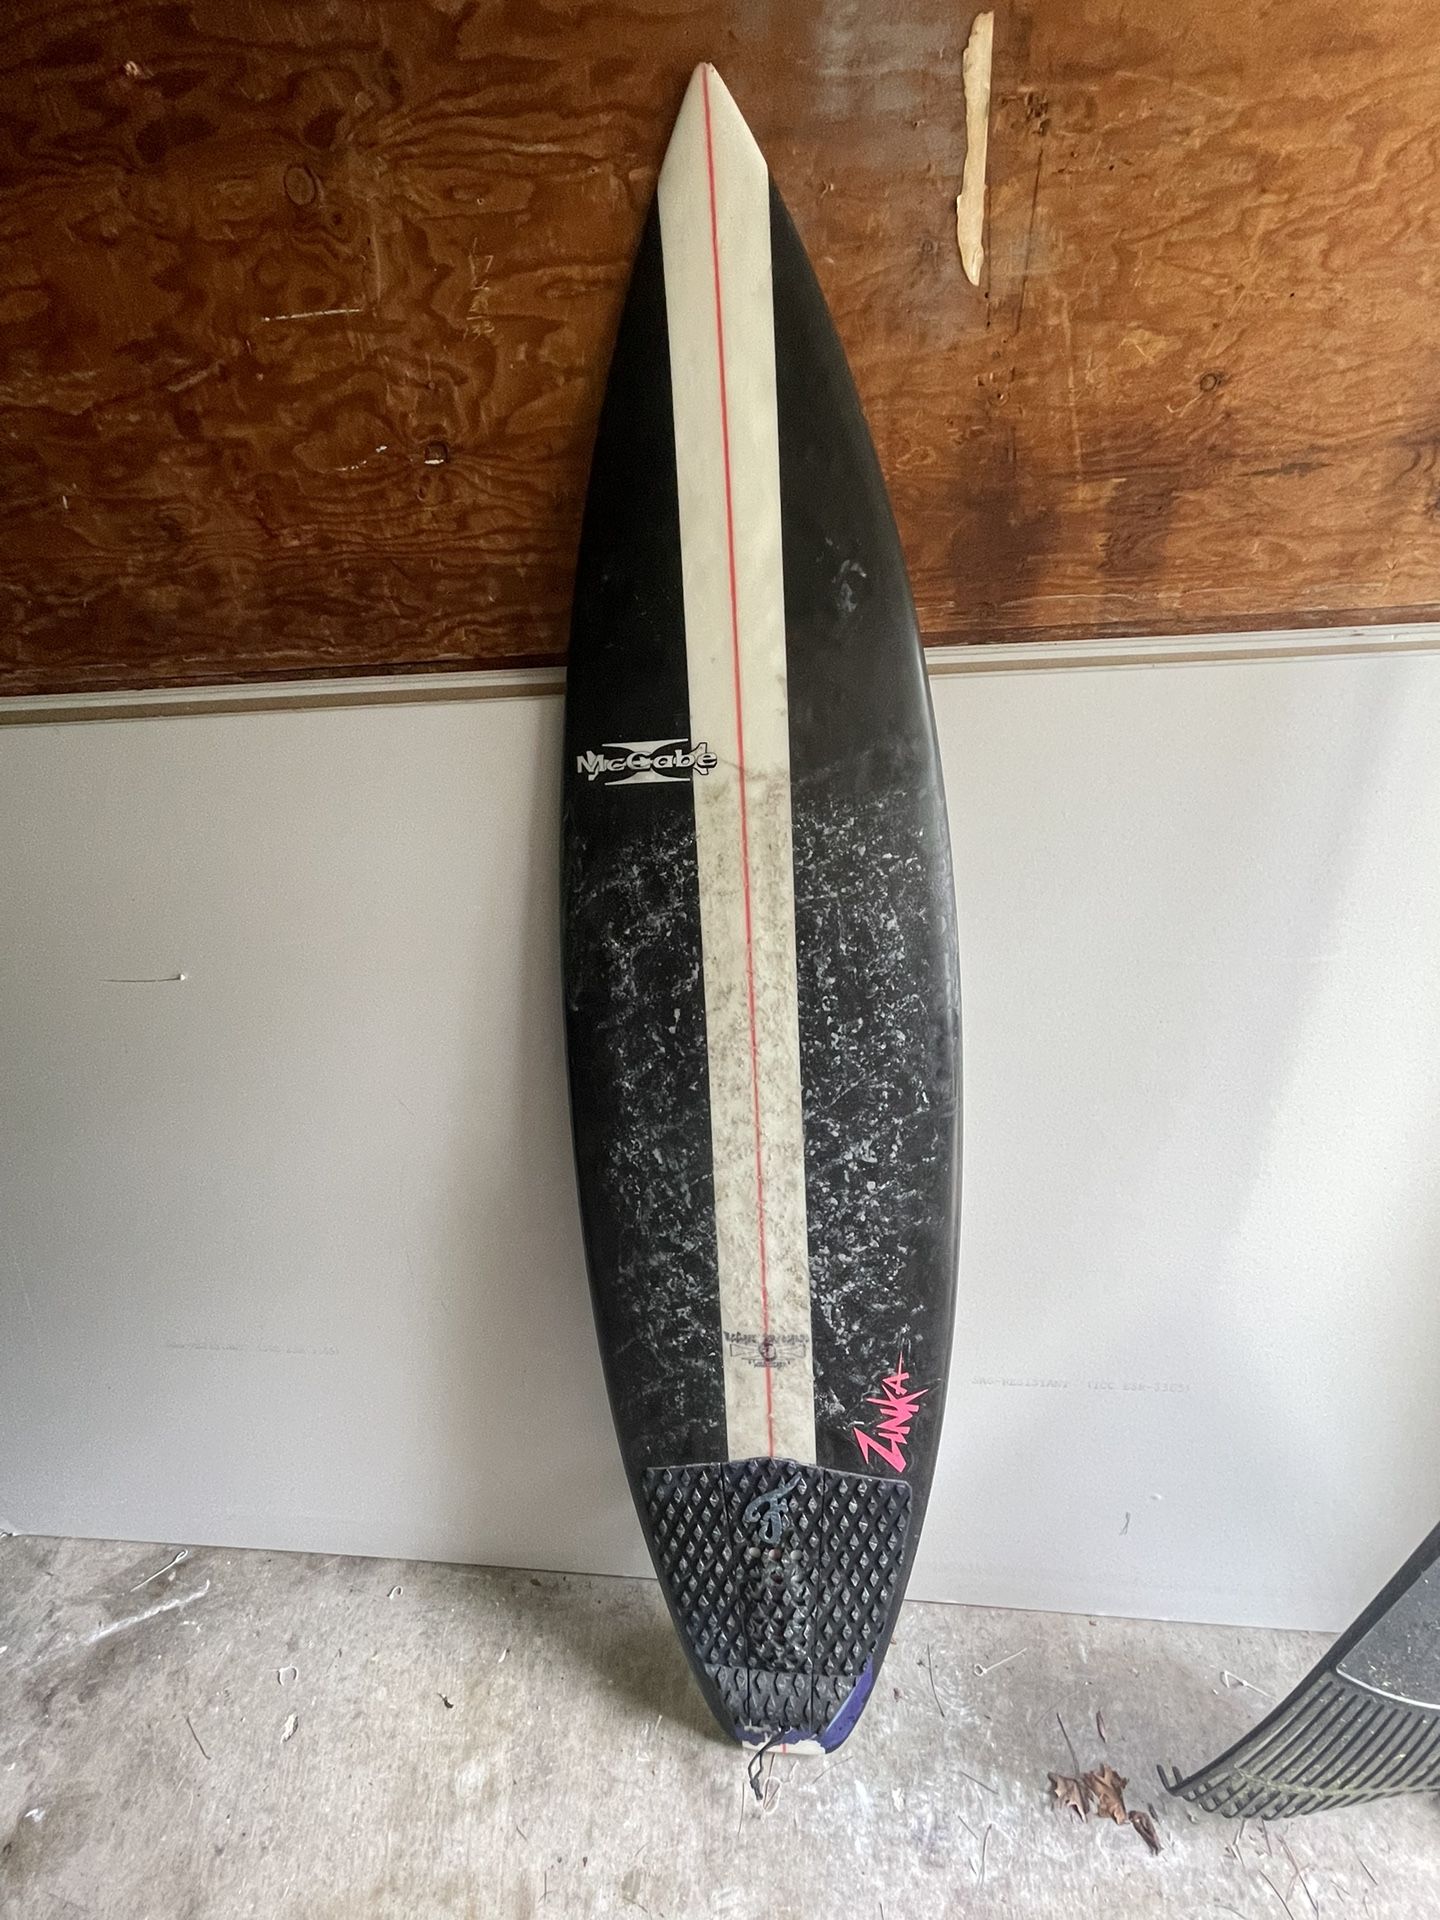 McCabe F bomb Surfboard for Sale in Spring Valley, CA - OfferUp